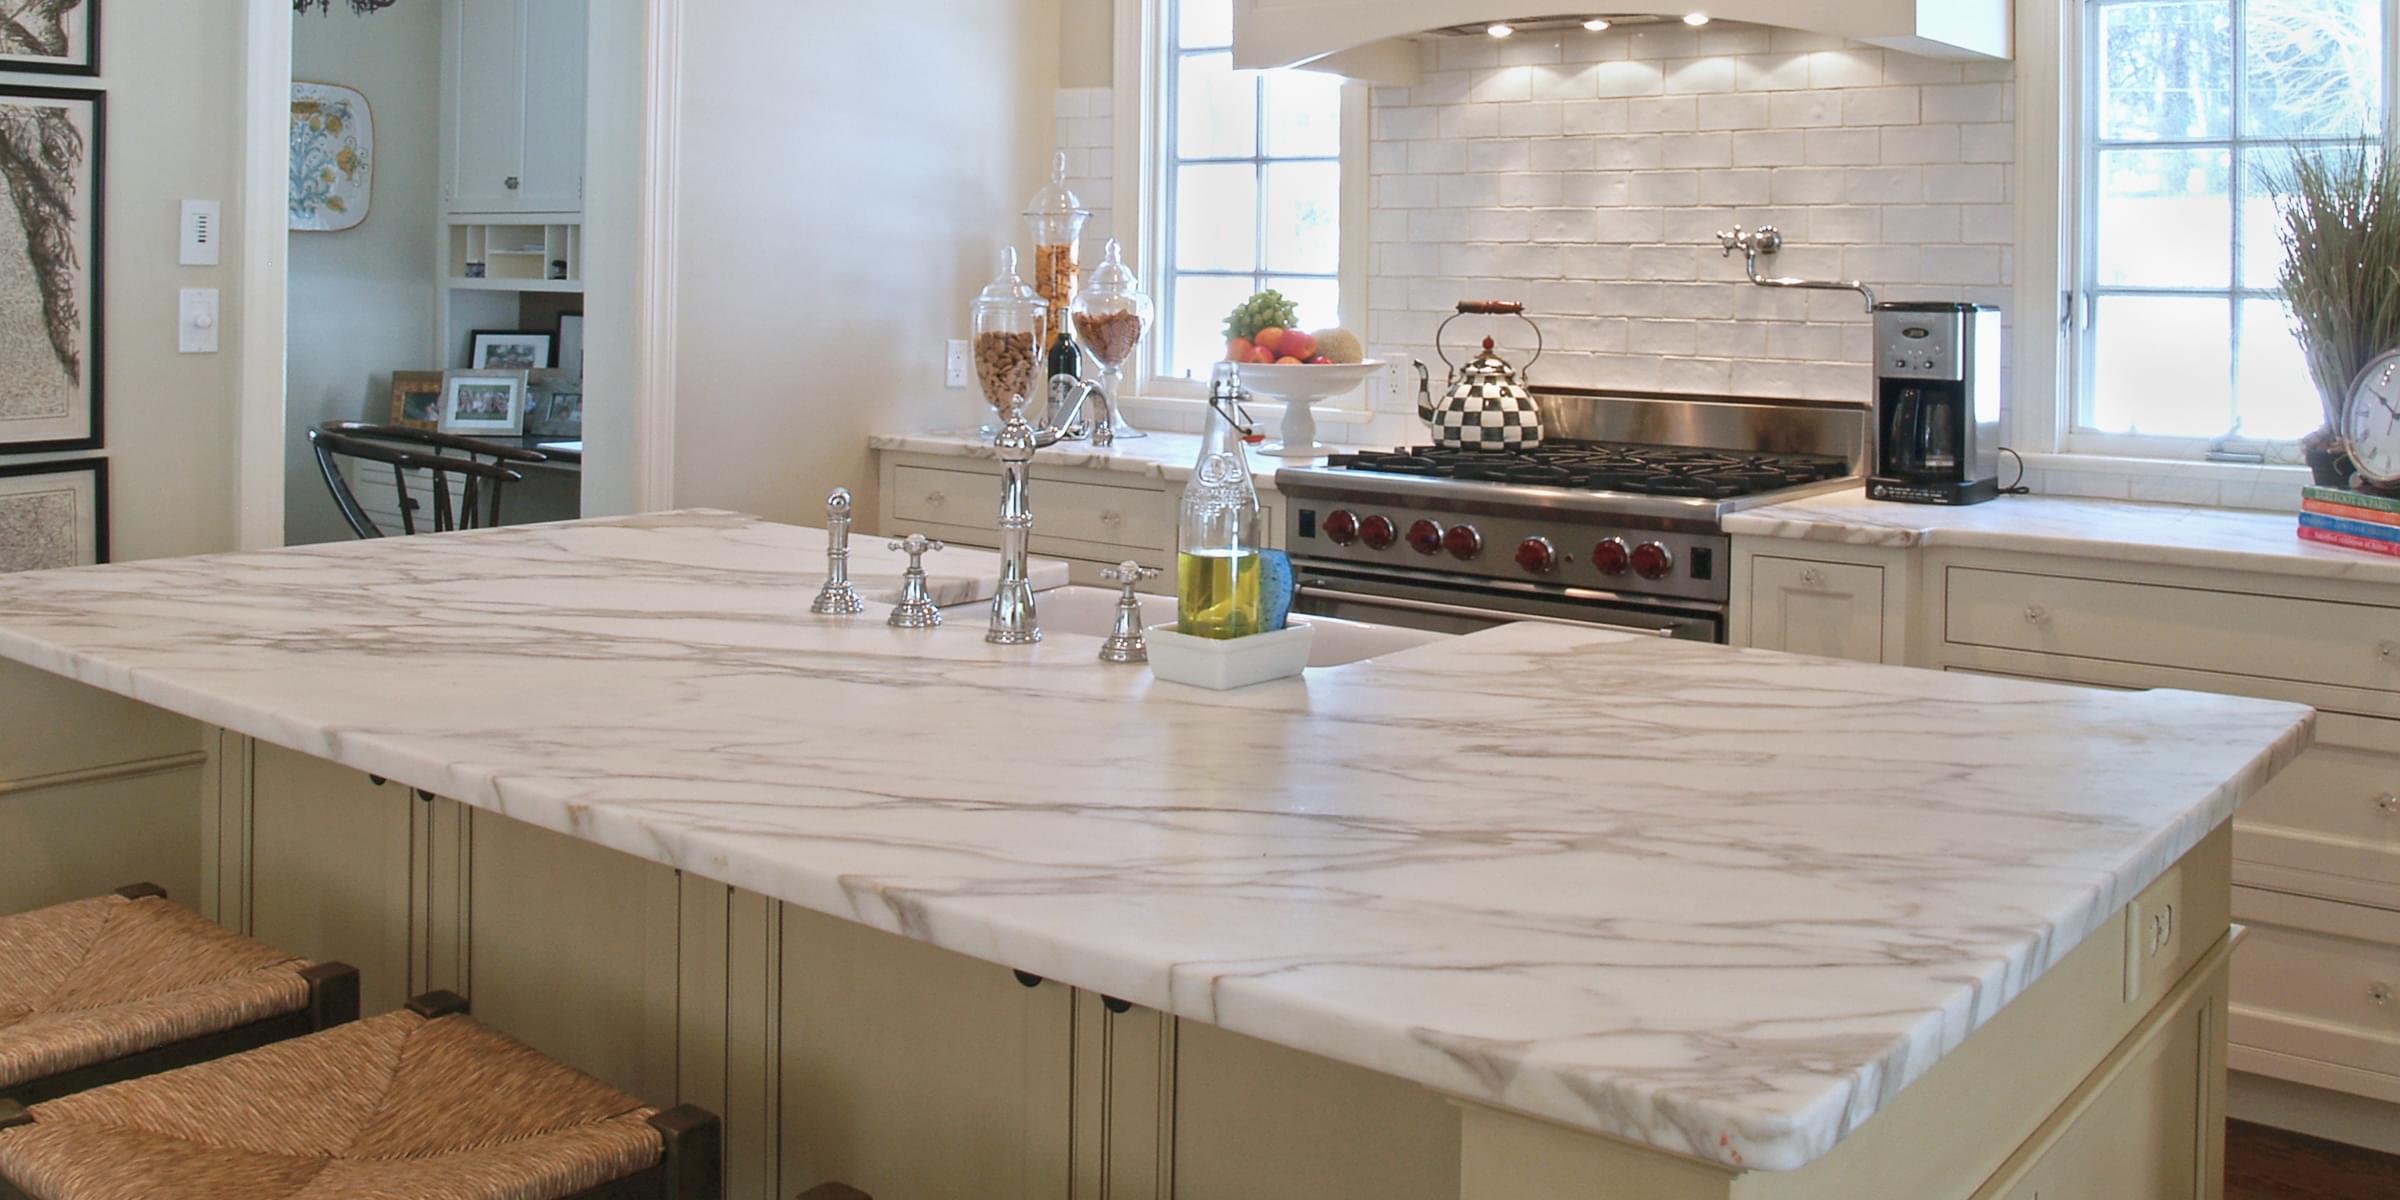 The High Quality Of Pro Stone Countertops